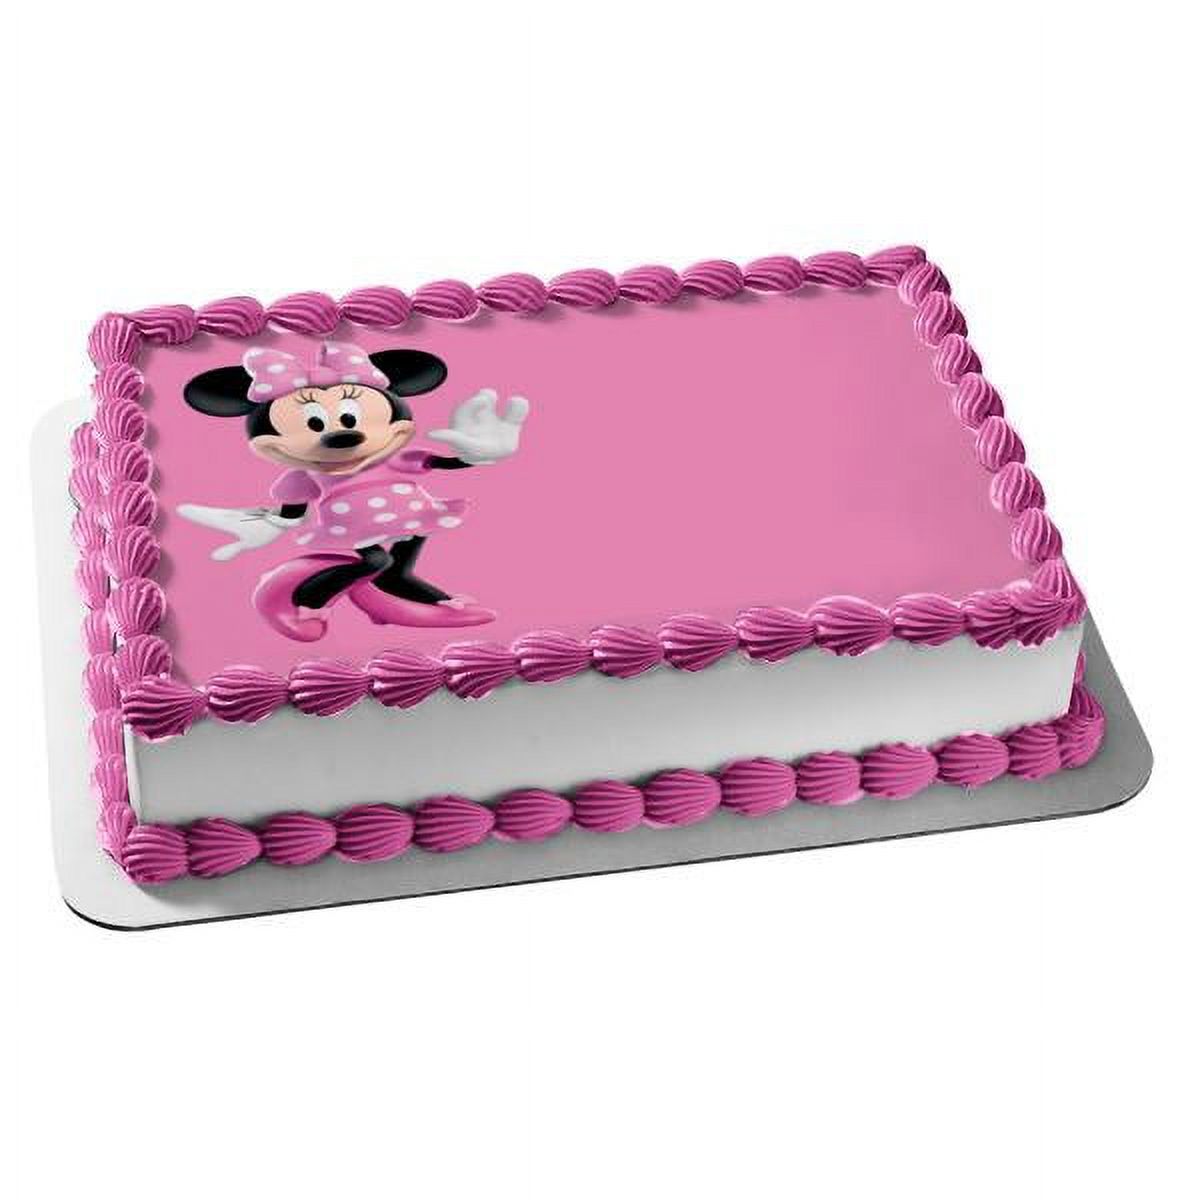 MINNIE MOUSE party decoration edible cake image cake topper birthday - image 1 of 4